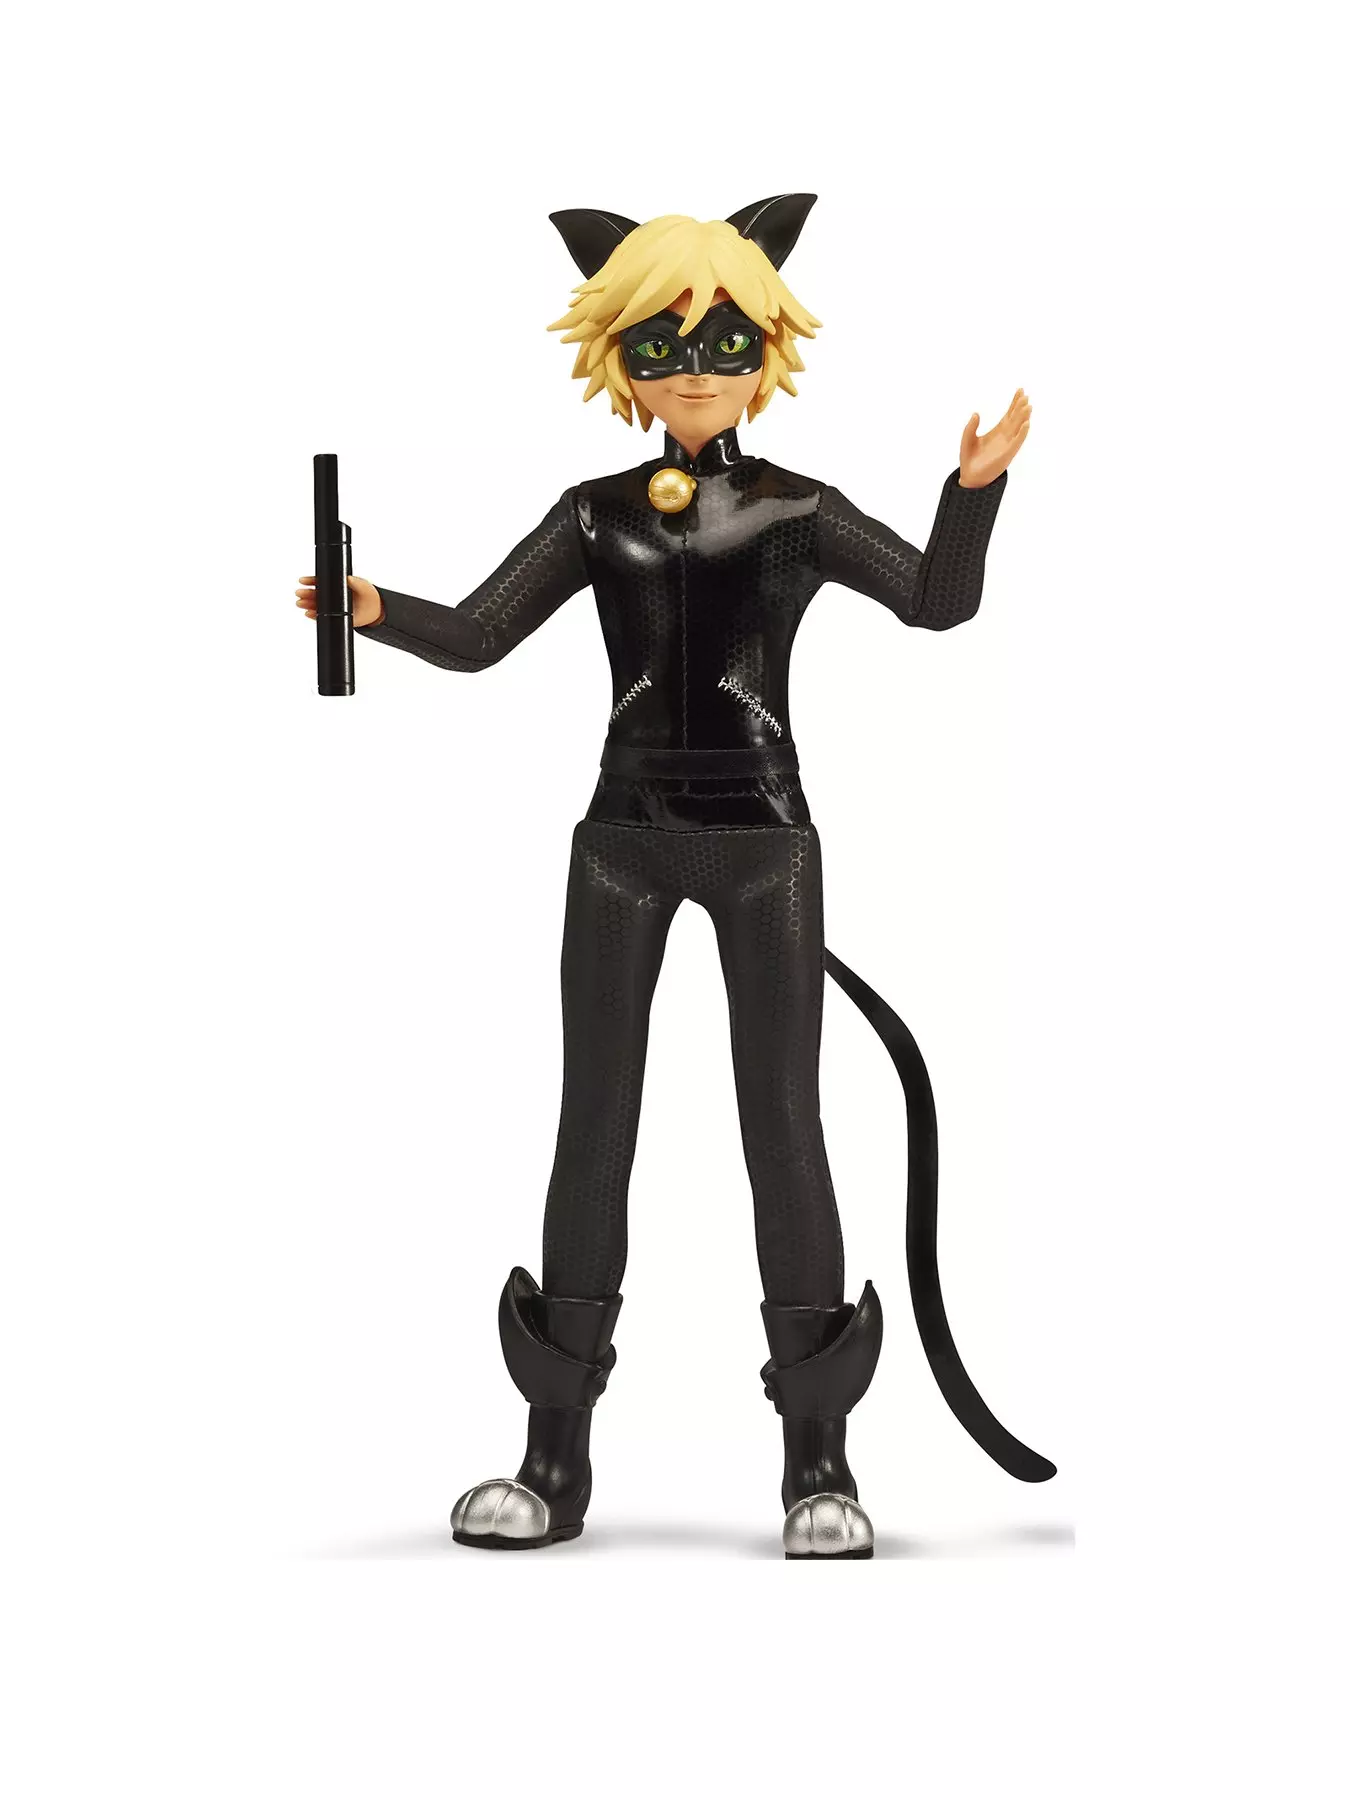 Miraculous RP: Ladybug & Chat Noir Update 12 Notes, by Miraculous RP News